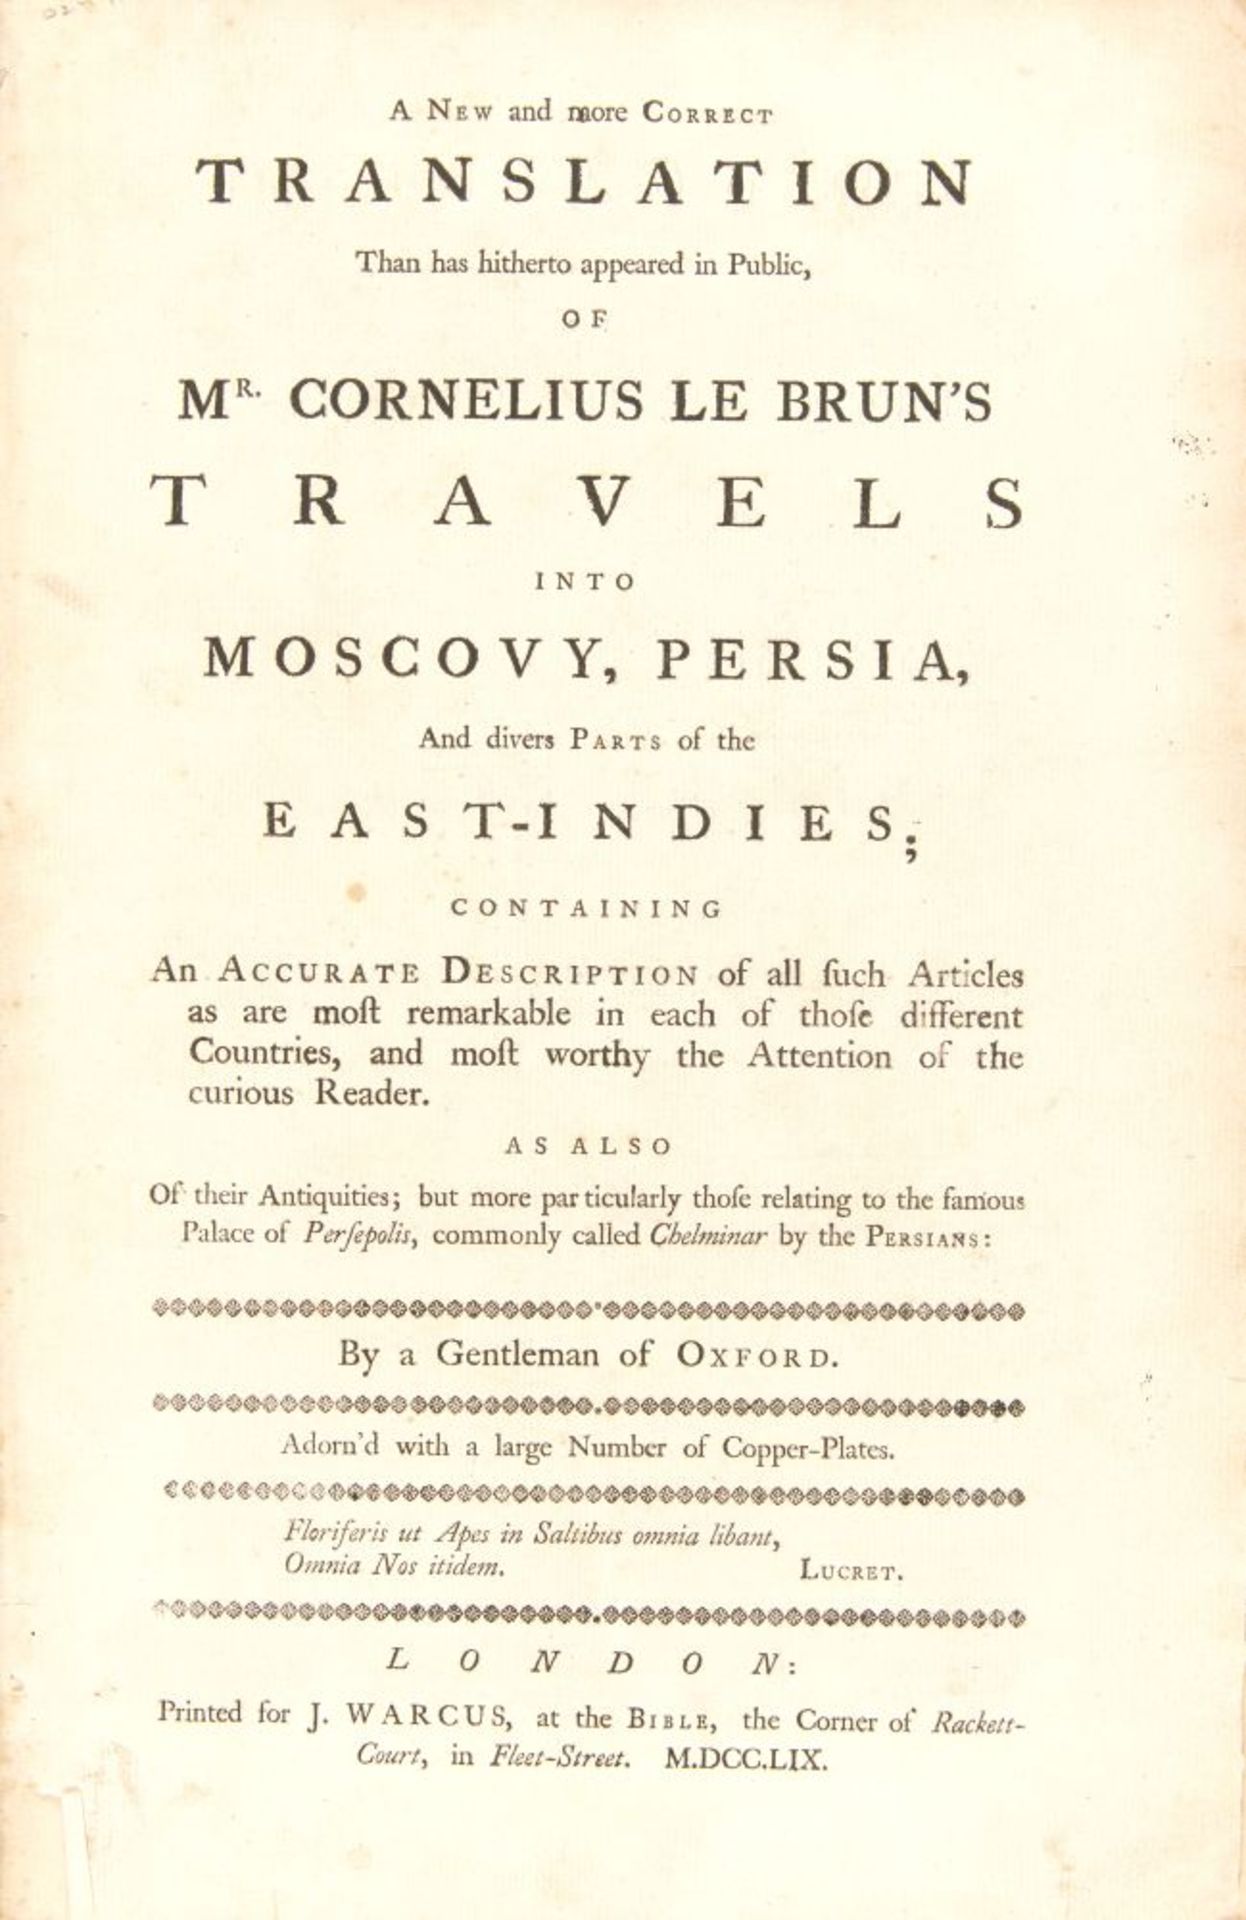 C. le Bruijn, Travels into Moscovy, Persia and East-Indies. London 1759. - Image 2 of 3